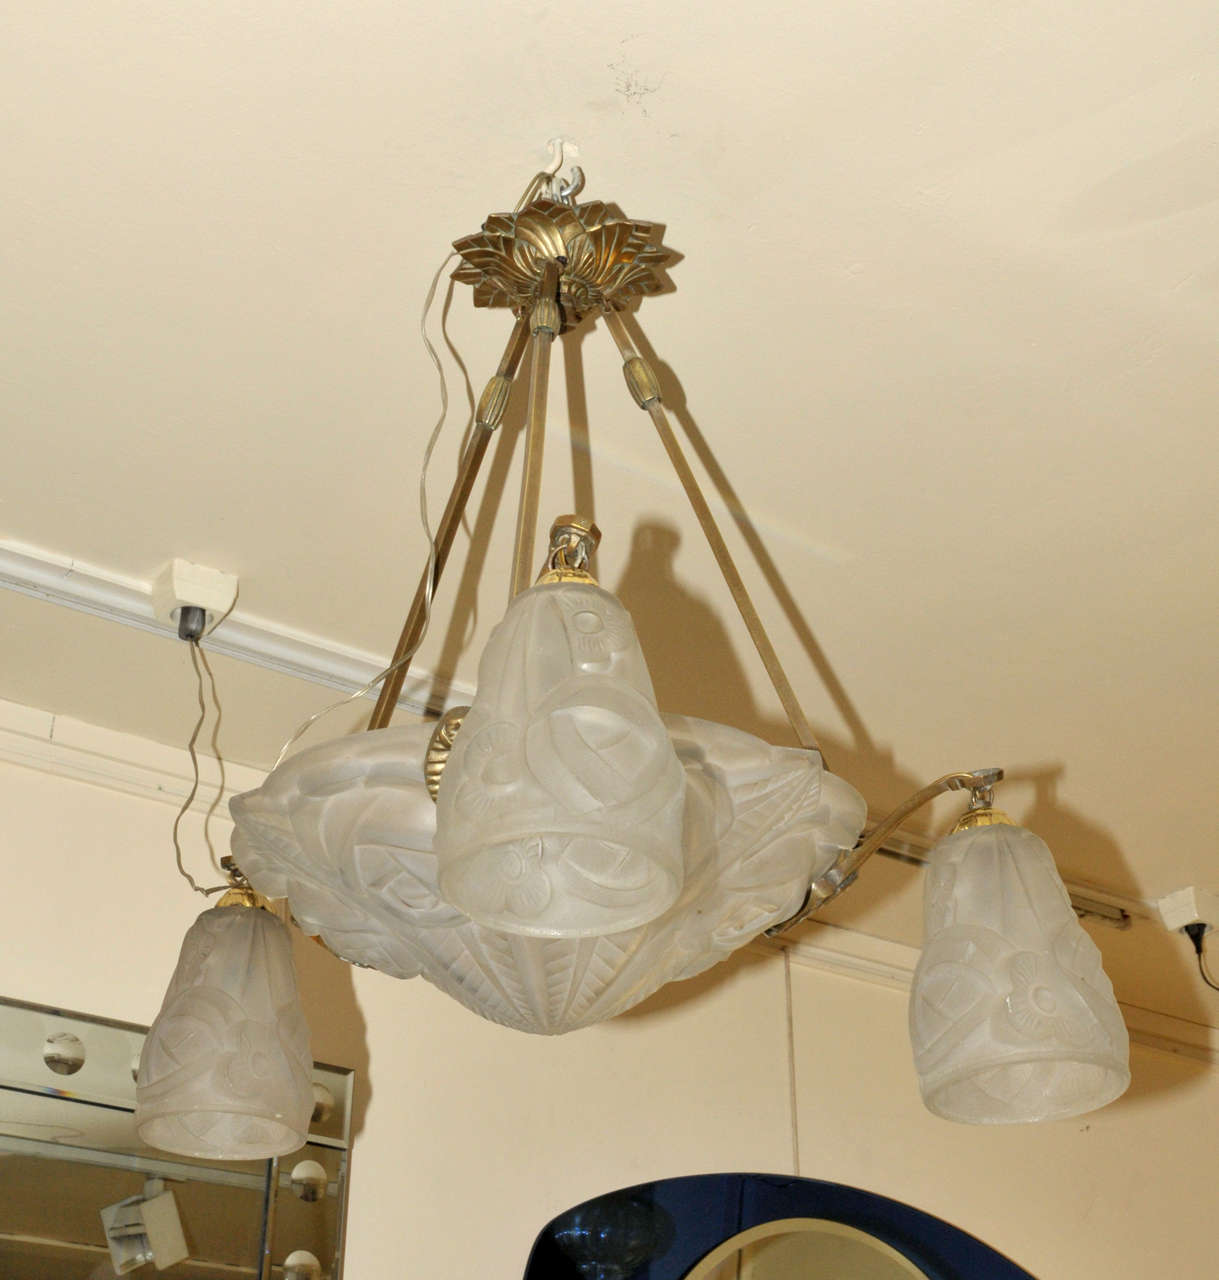 1930's glass and bronze chandelier. Three lighted arms. One inside light. Wired for European use. Good condition. Normal wear consistent with age and use.